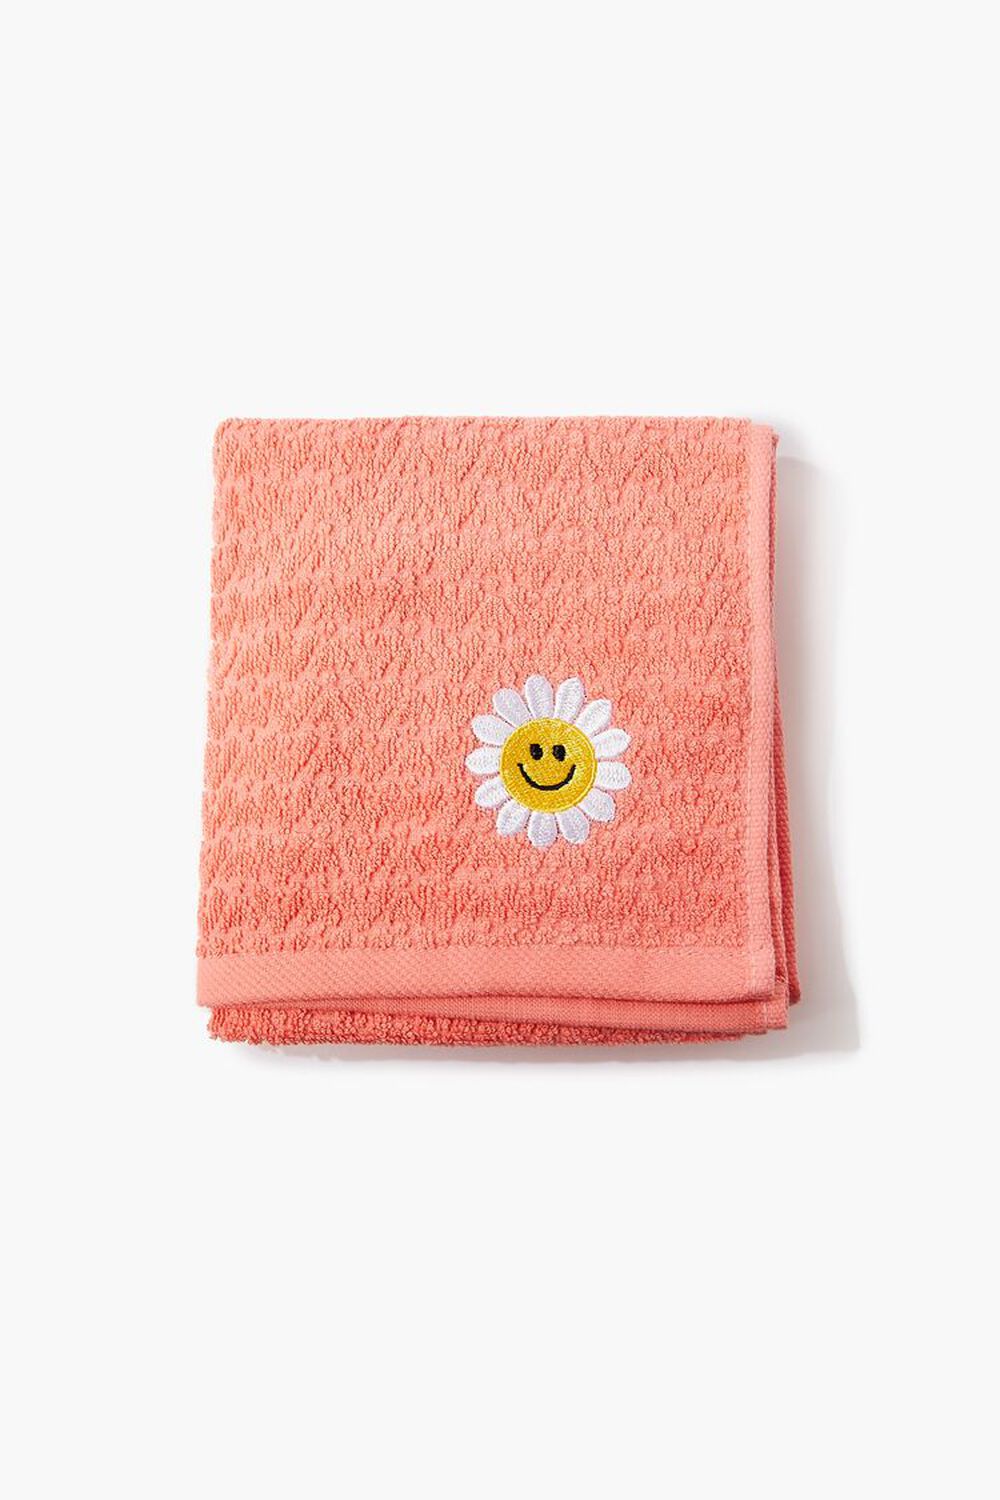 PINK Embroidered Floral Hand Towel, image 1